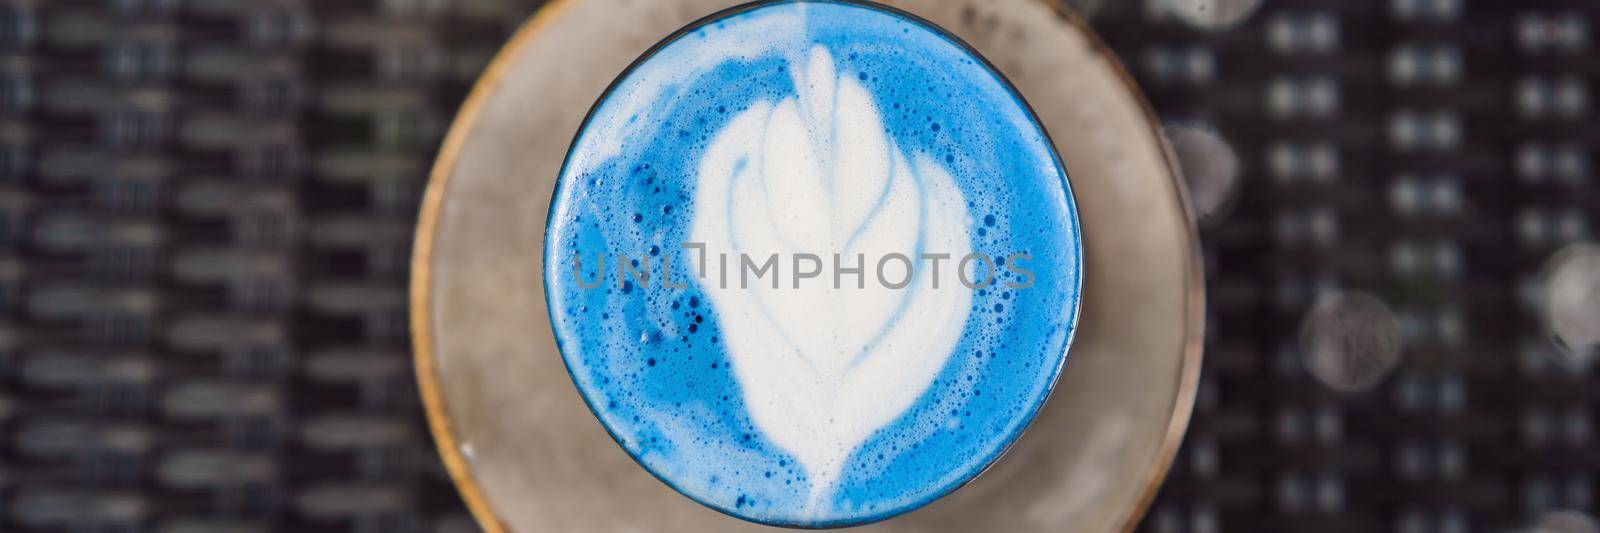 Trendy drink: Blue latte. Top view of hot butterfly pea latte or blue spirulina latte on gray textured background. Copy space for text. BANNER, LONG FORMAT